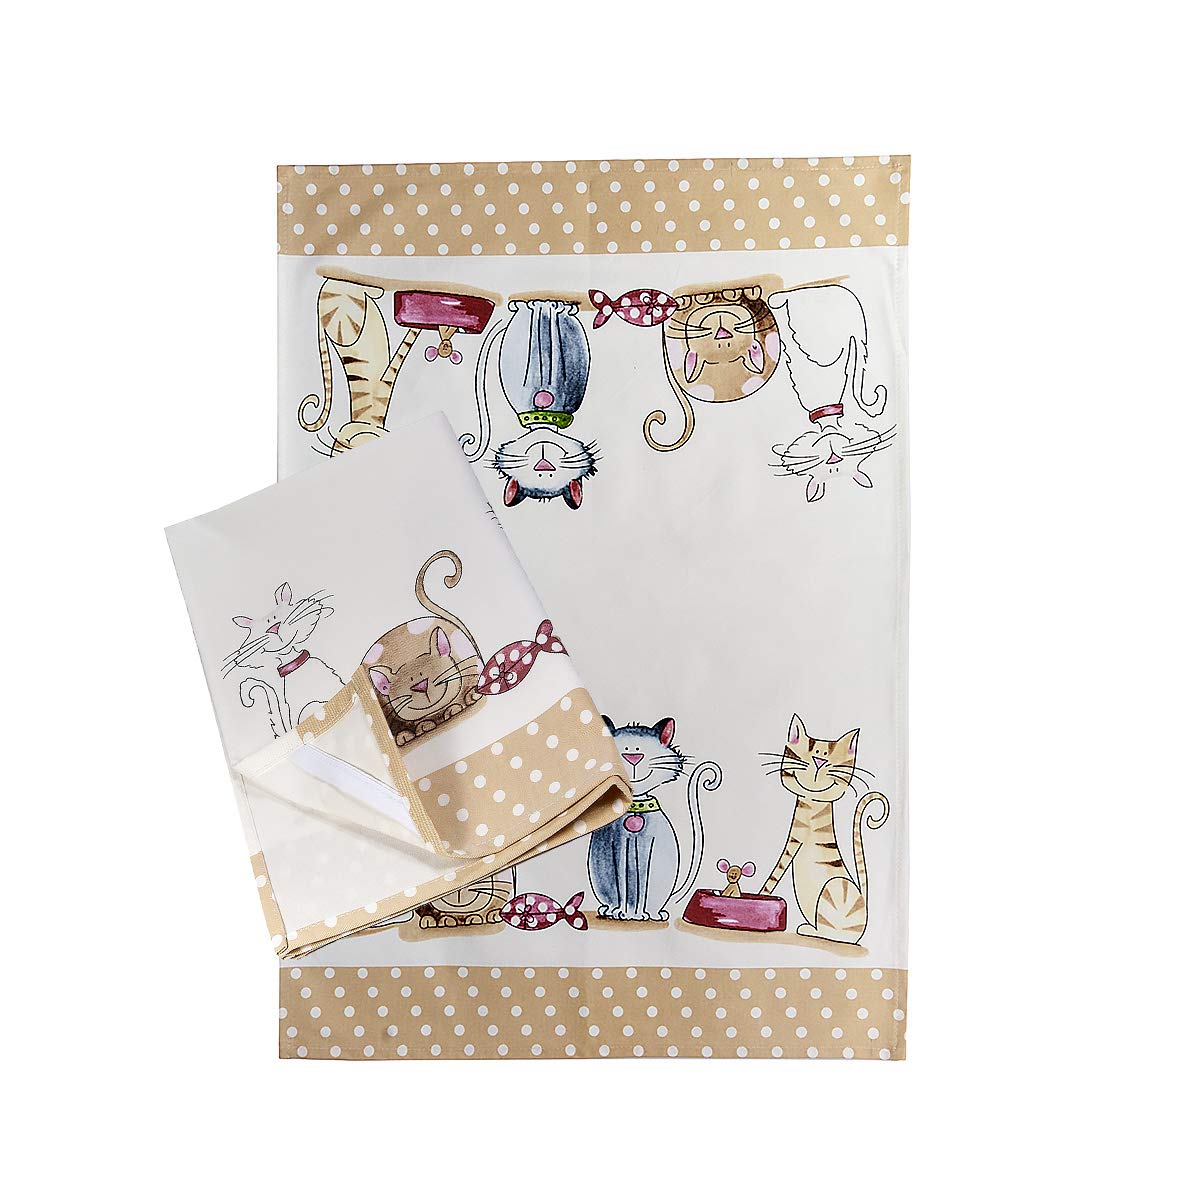 SPOTTED DOG GIFT COMPANY - Tea Towels, 100% Cotton, 50cm x 70cm, Pack of 2 Home Kitchen Towel with Hanging Loop, Cat Themed - Gift Women Men